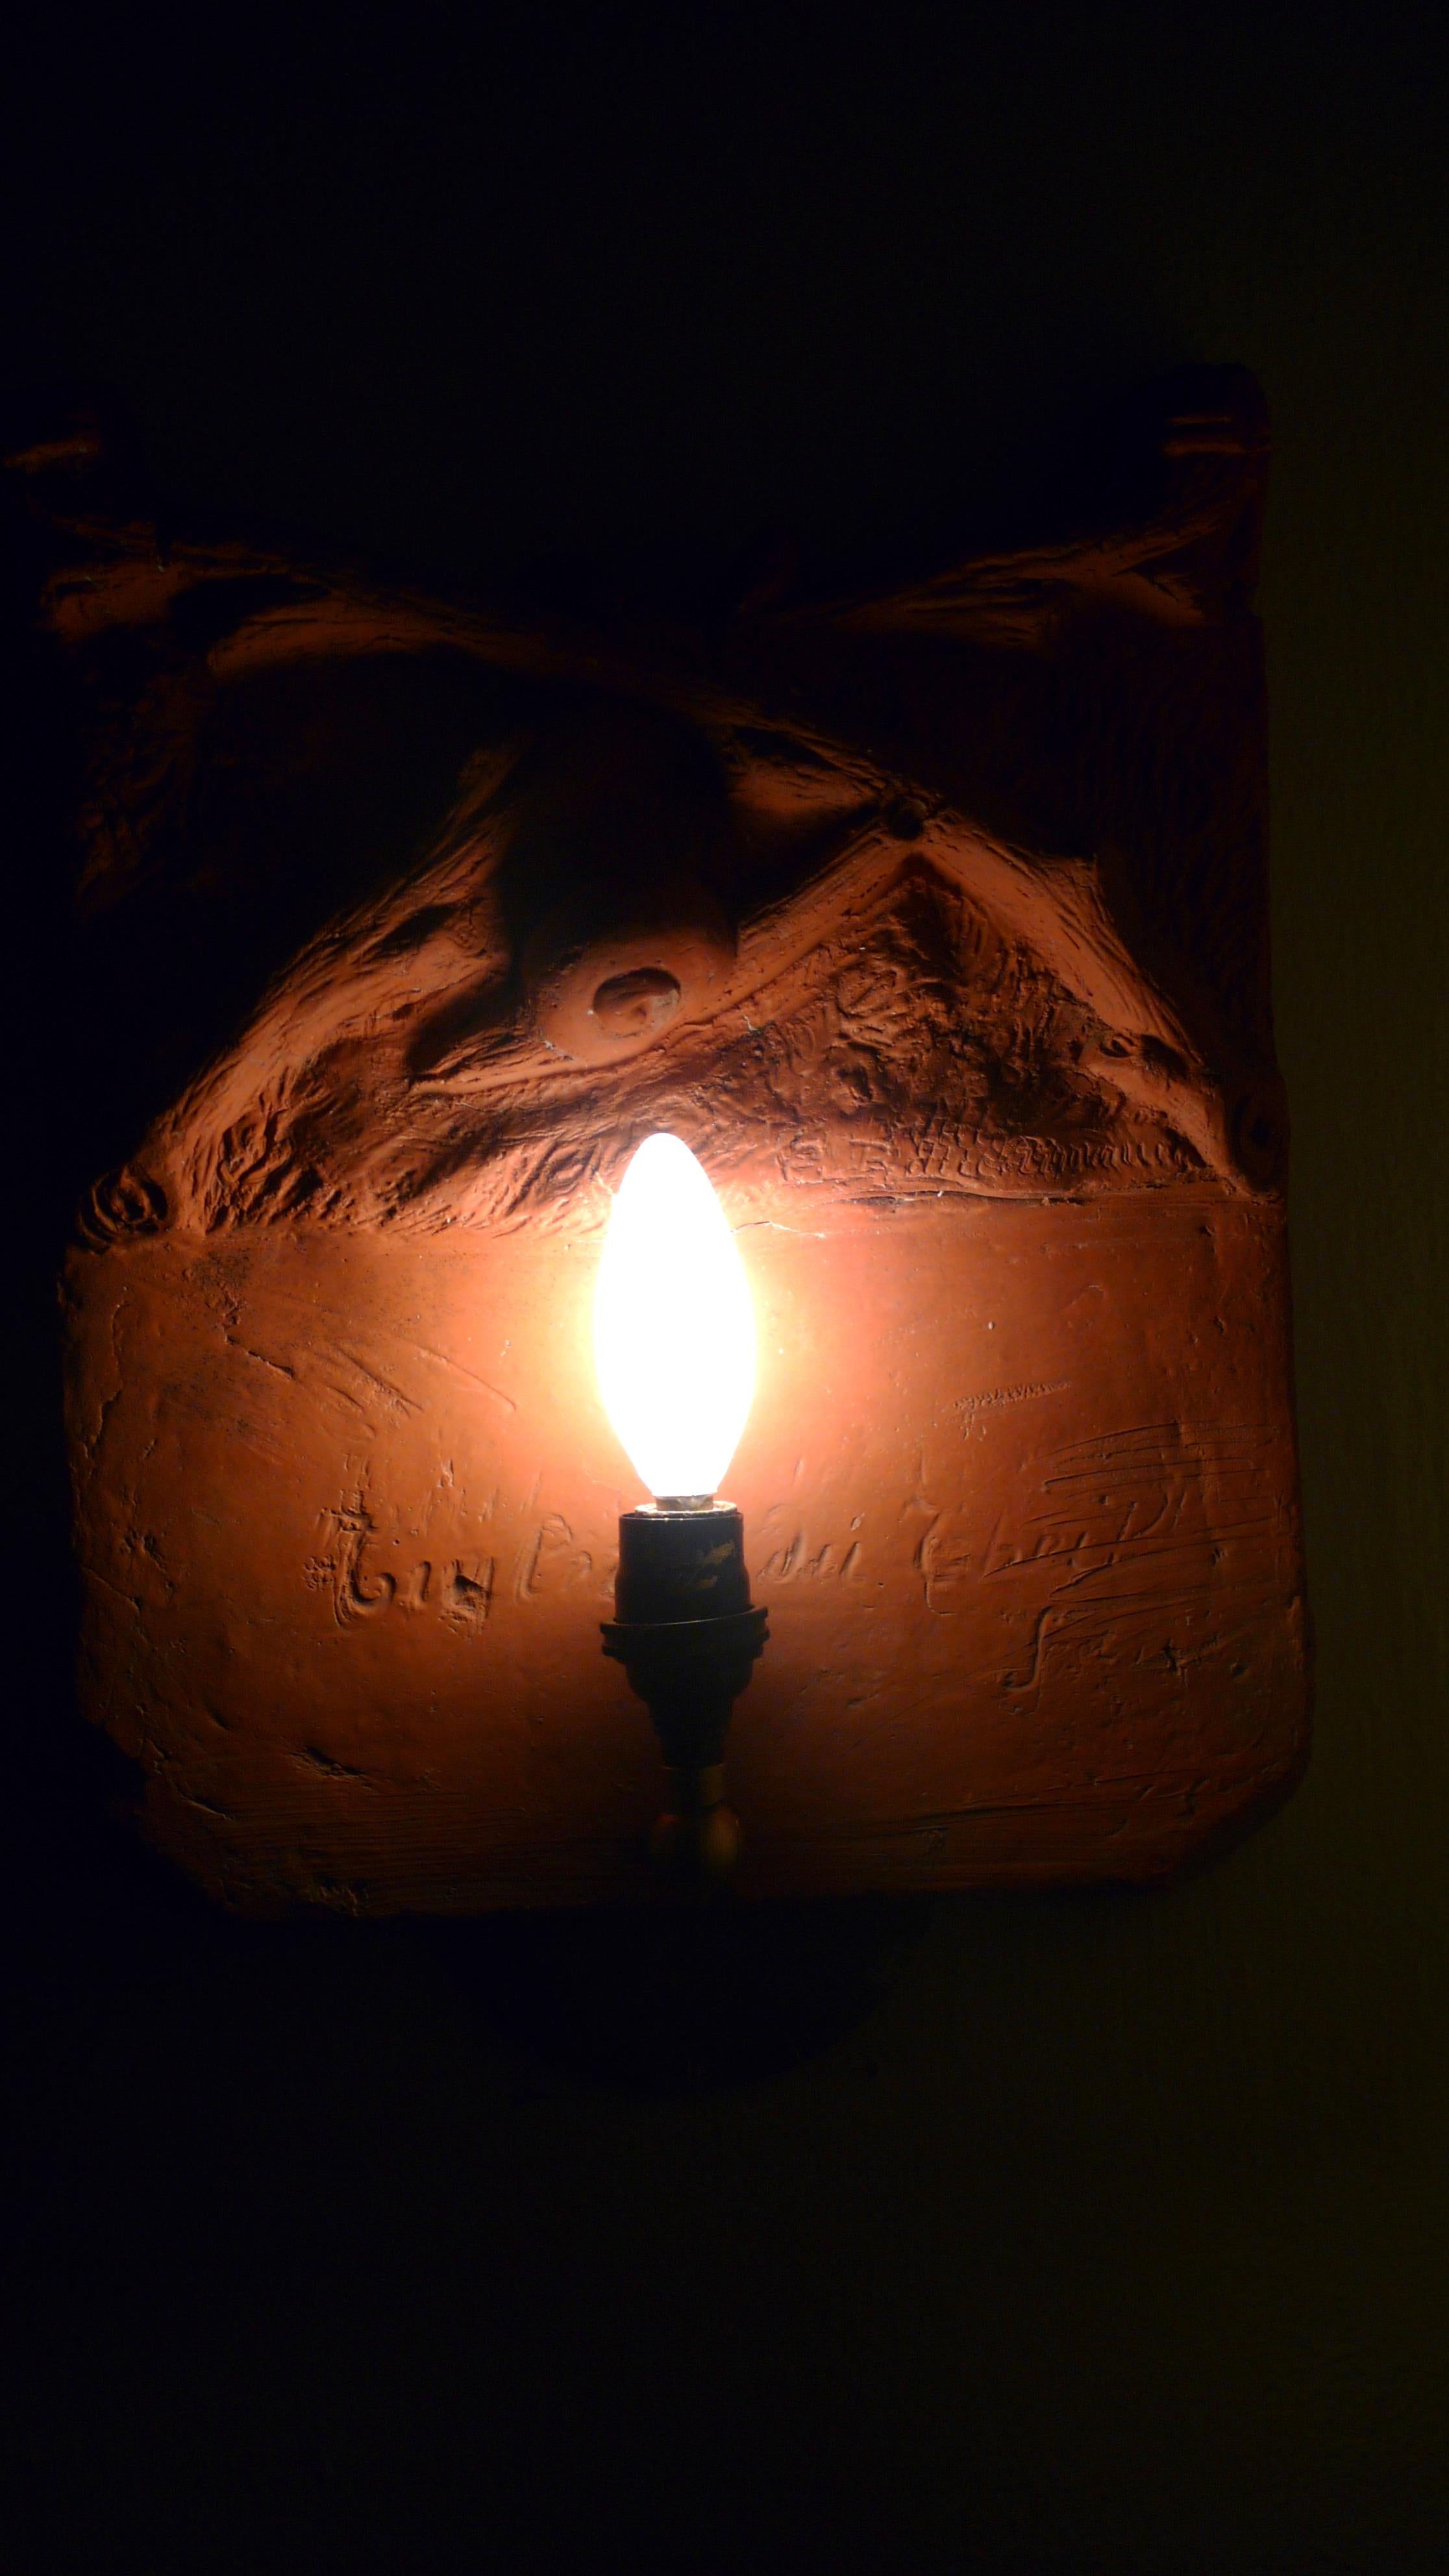 Early 1700s French terracotta garden stone signed by the artist. Has been made into a hallway sconce. Mysterious, earthen, tactile. Depicts snail crawling amongst ground cover. Professionally wired candelabra socket and bulb is hardwired into